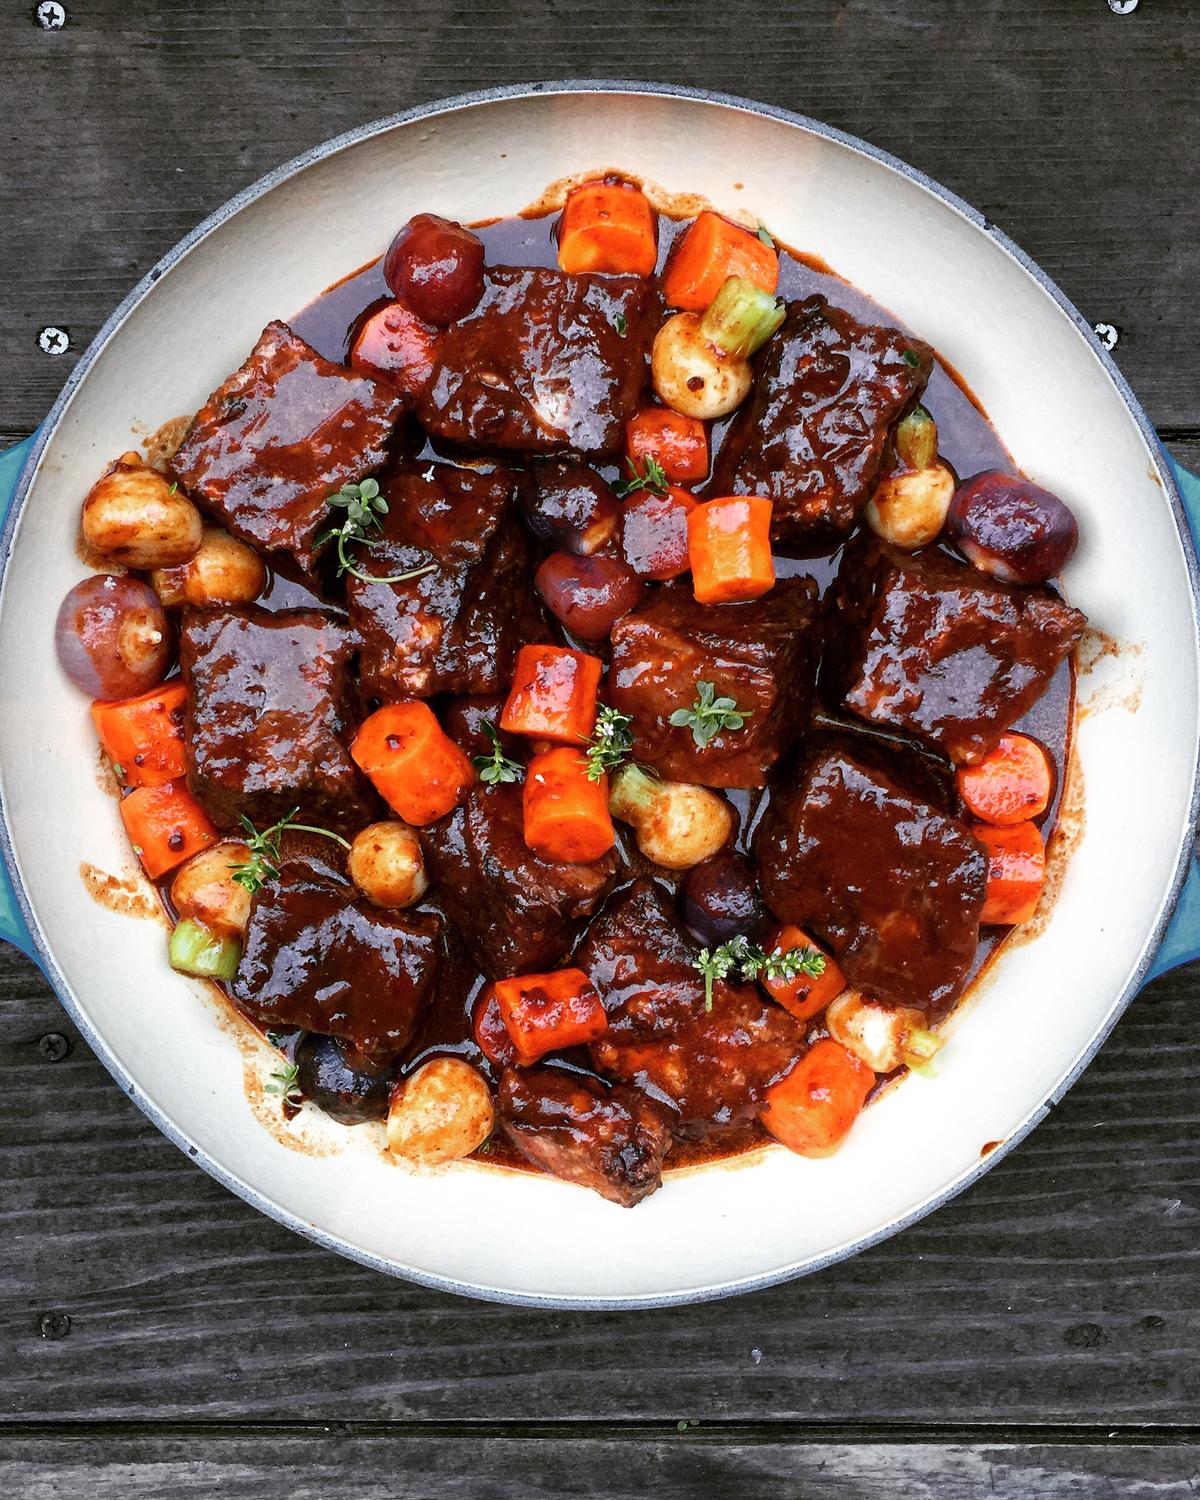  This stew leans to the Southwest for inspiration, with chipotle peppers, cumin, and coriander added to its collection of root vegetables and ribs. (Lynda Balslev for Tastefood)